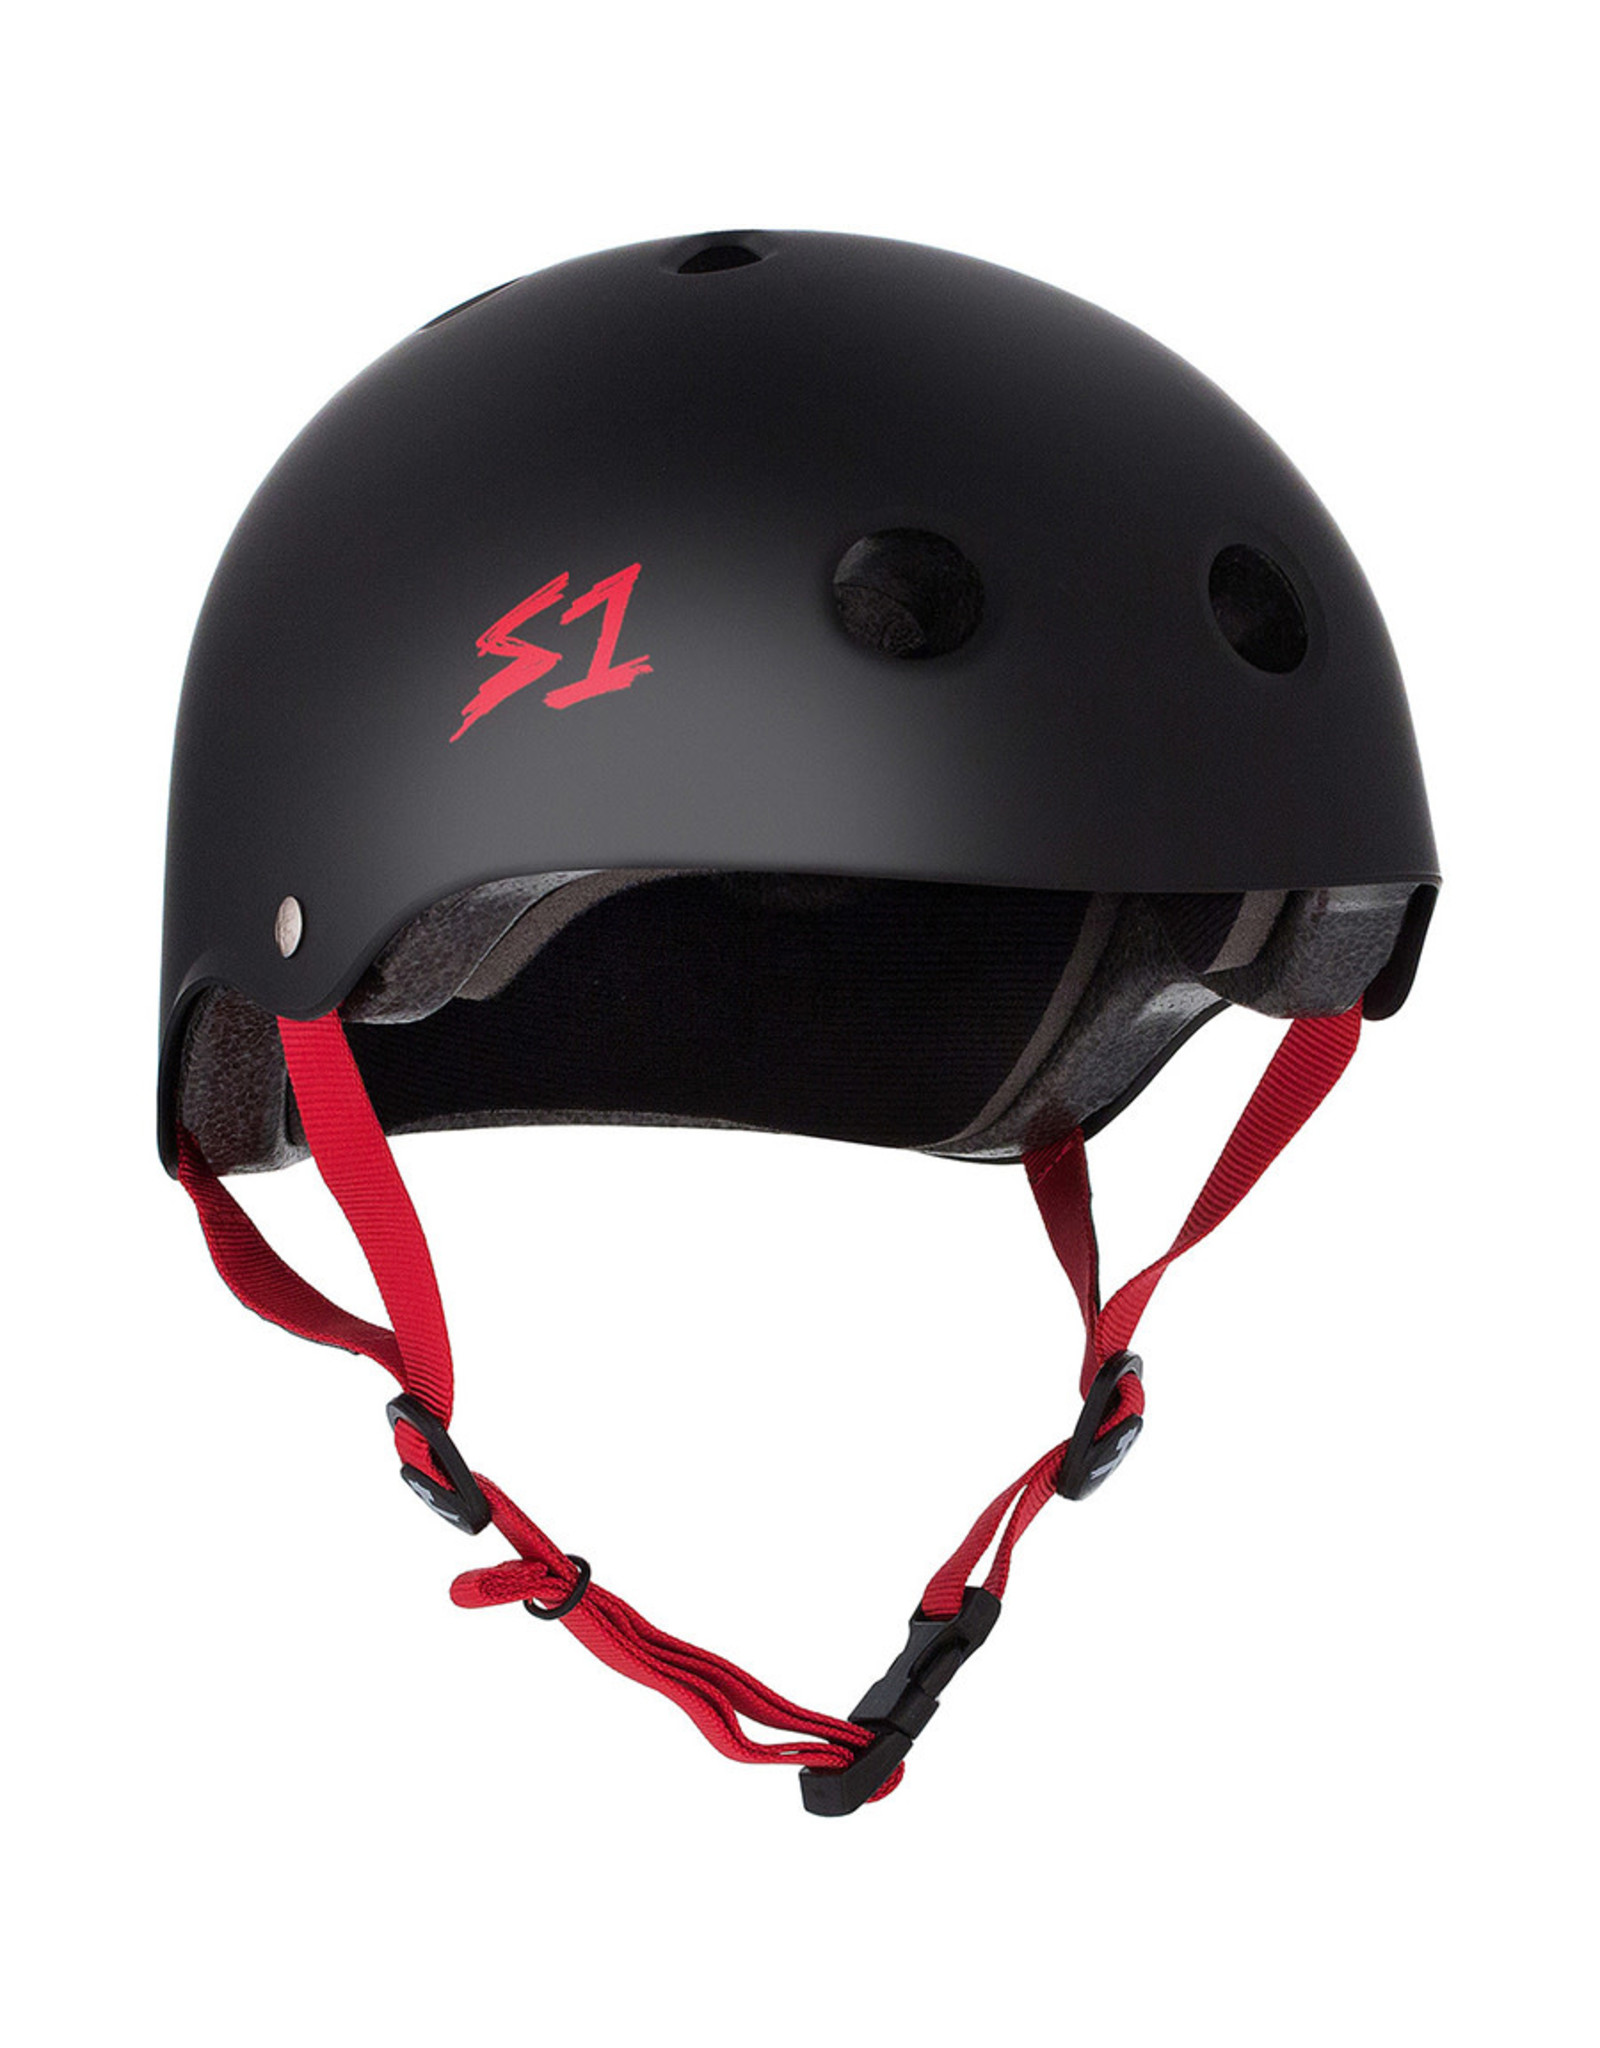 S-One S-One Helmet The Adult Lifer (Black Matte/Red Straps)